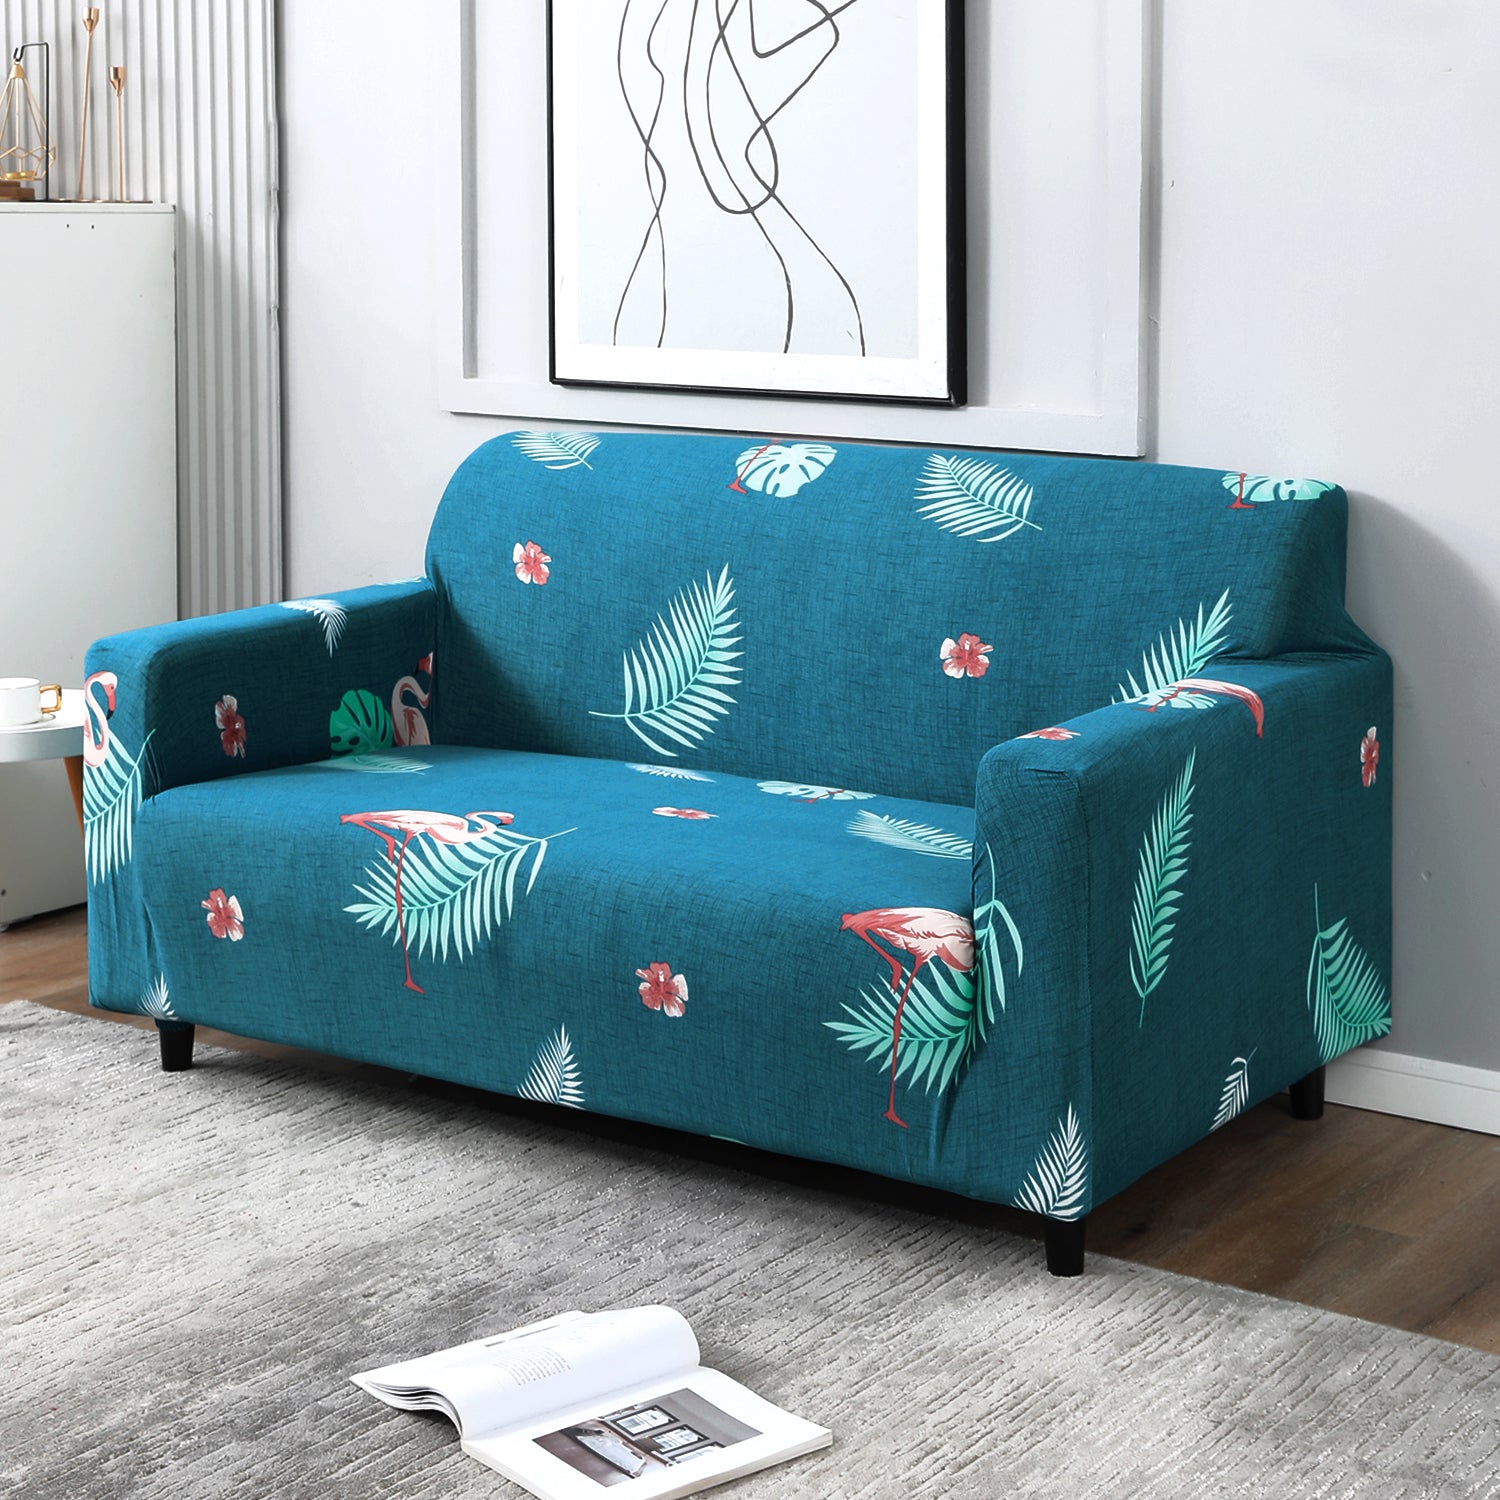 Elastic Stretchable Printed Sofa Cover, Feather Print